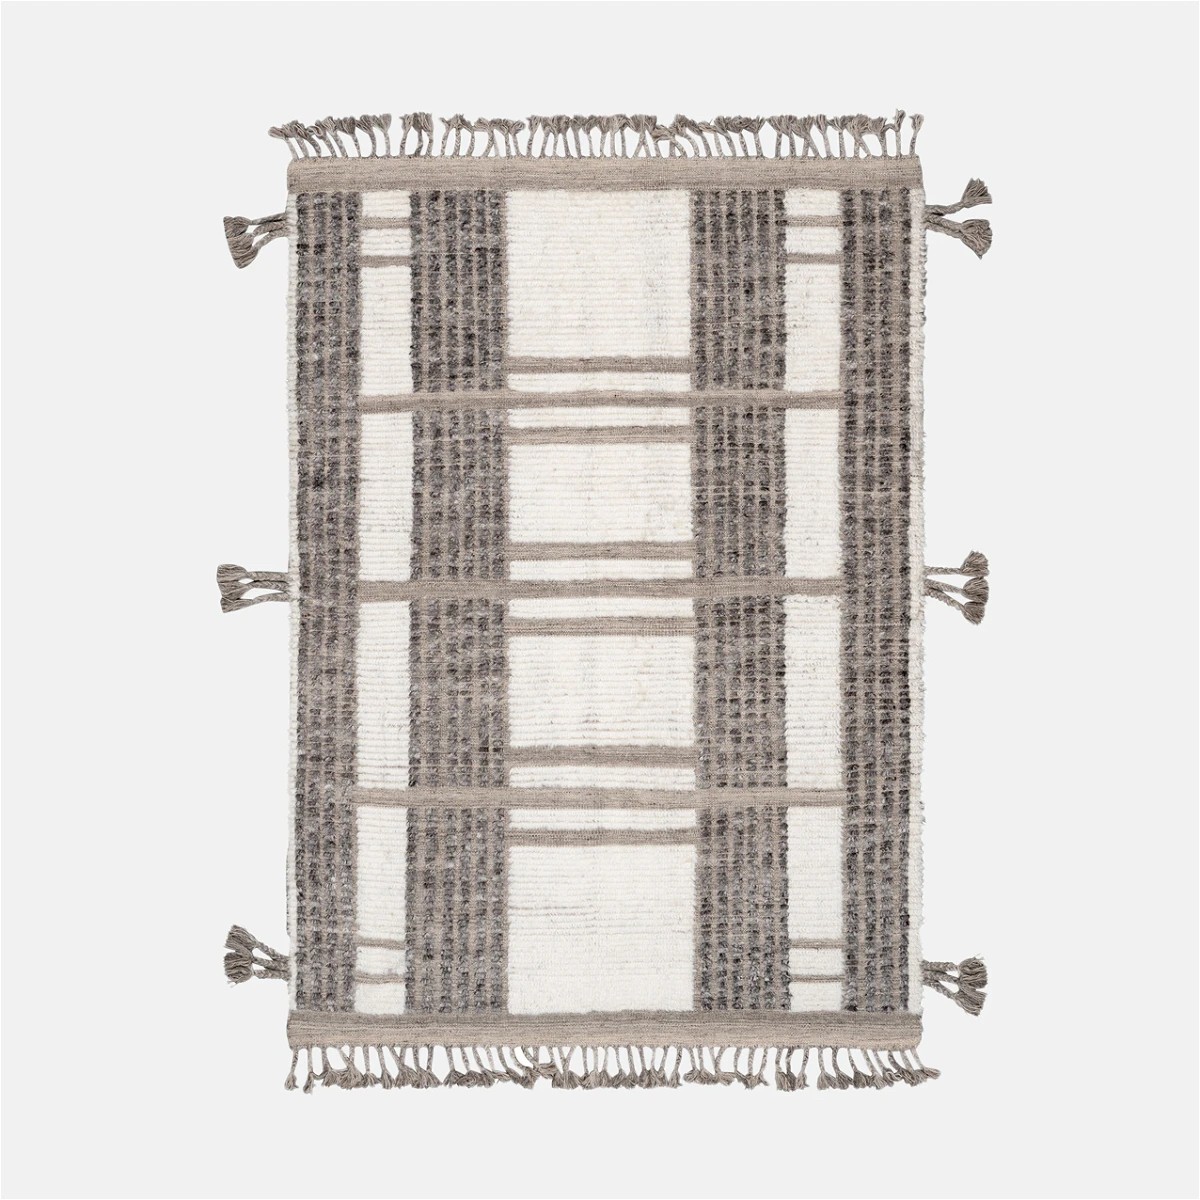 The image of an Ceti Rug product